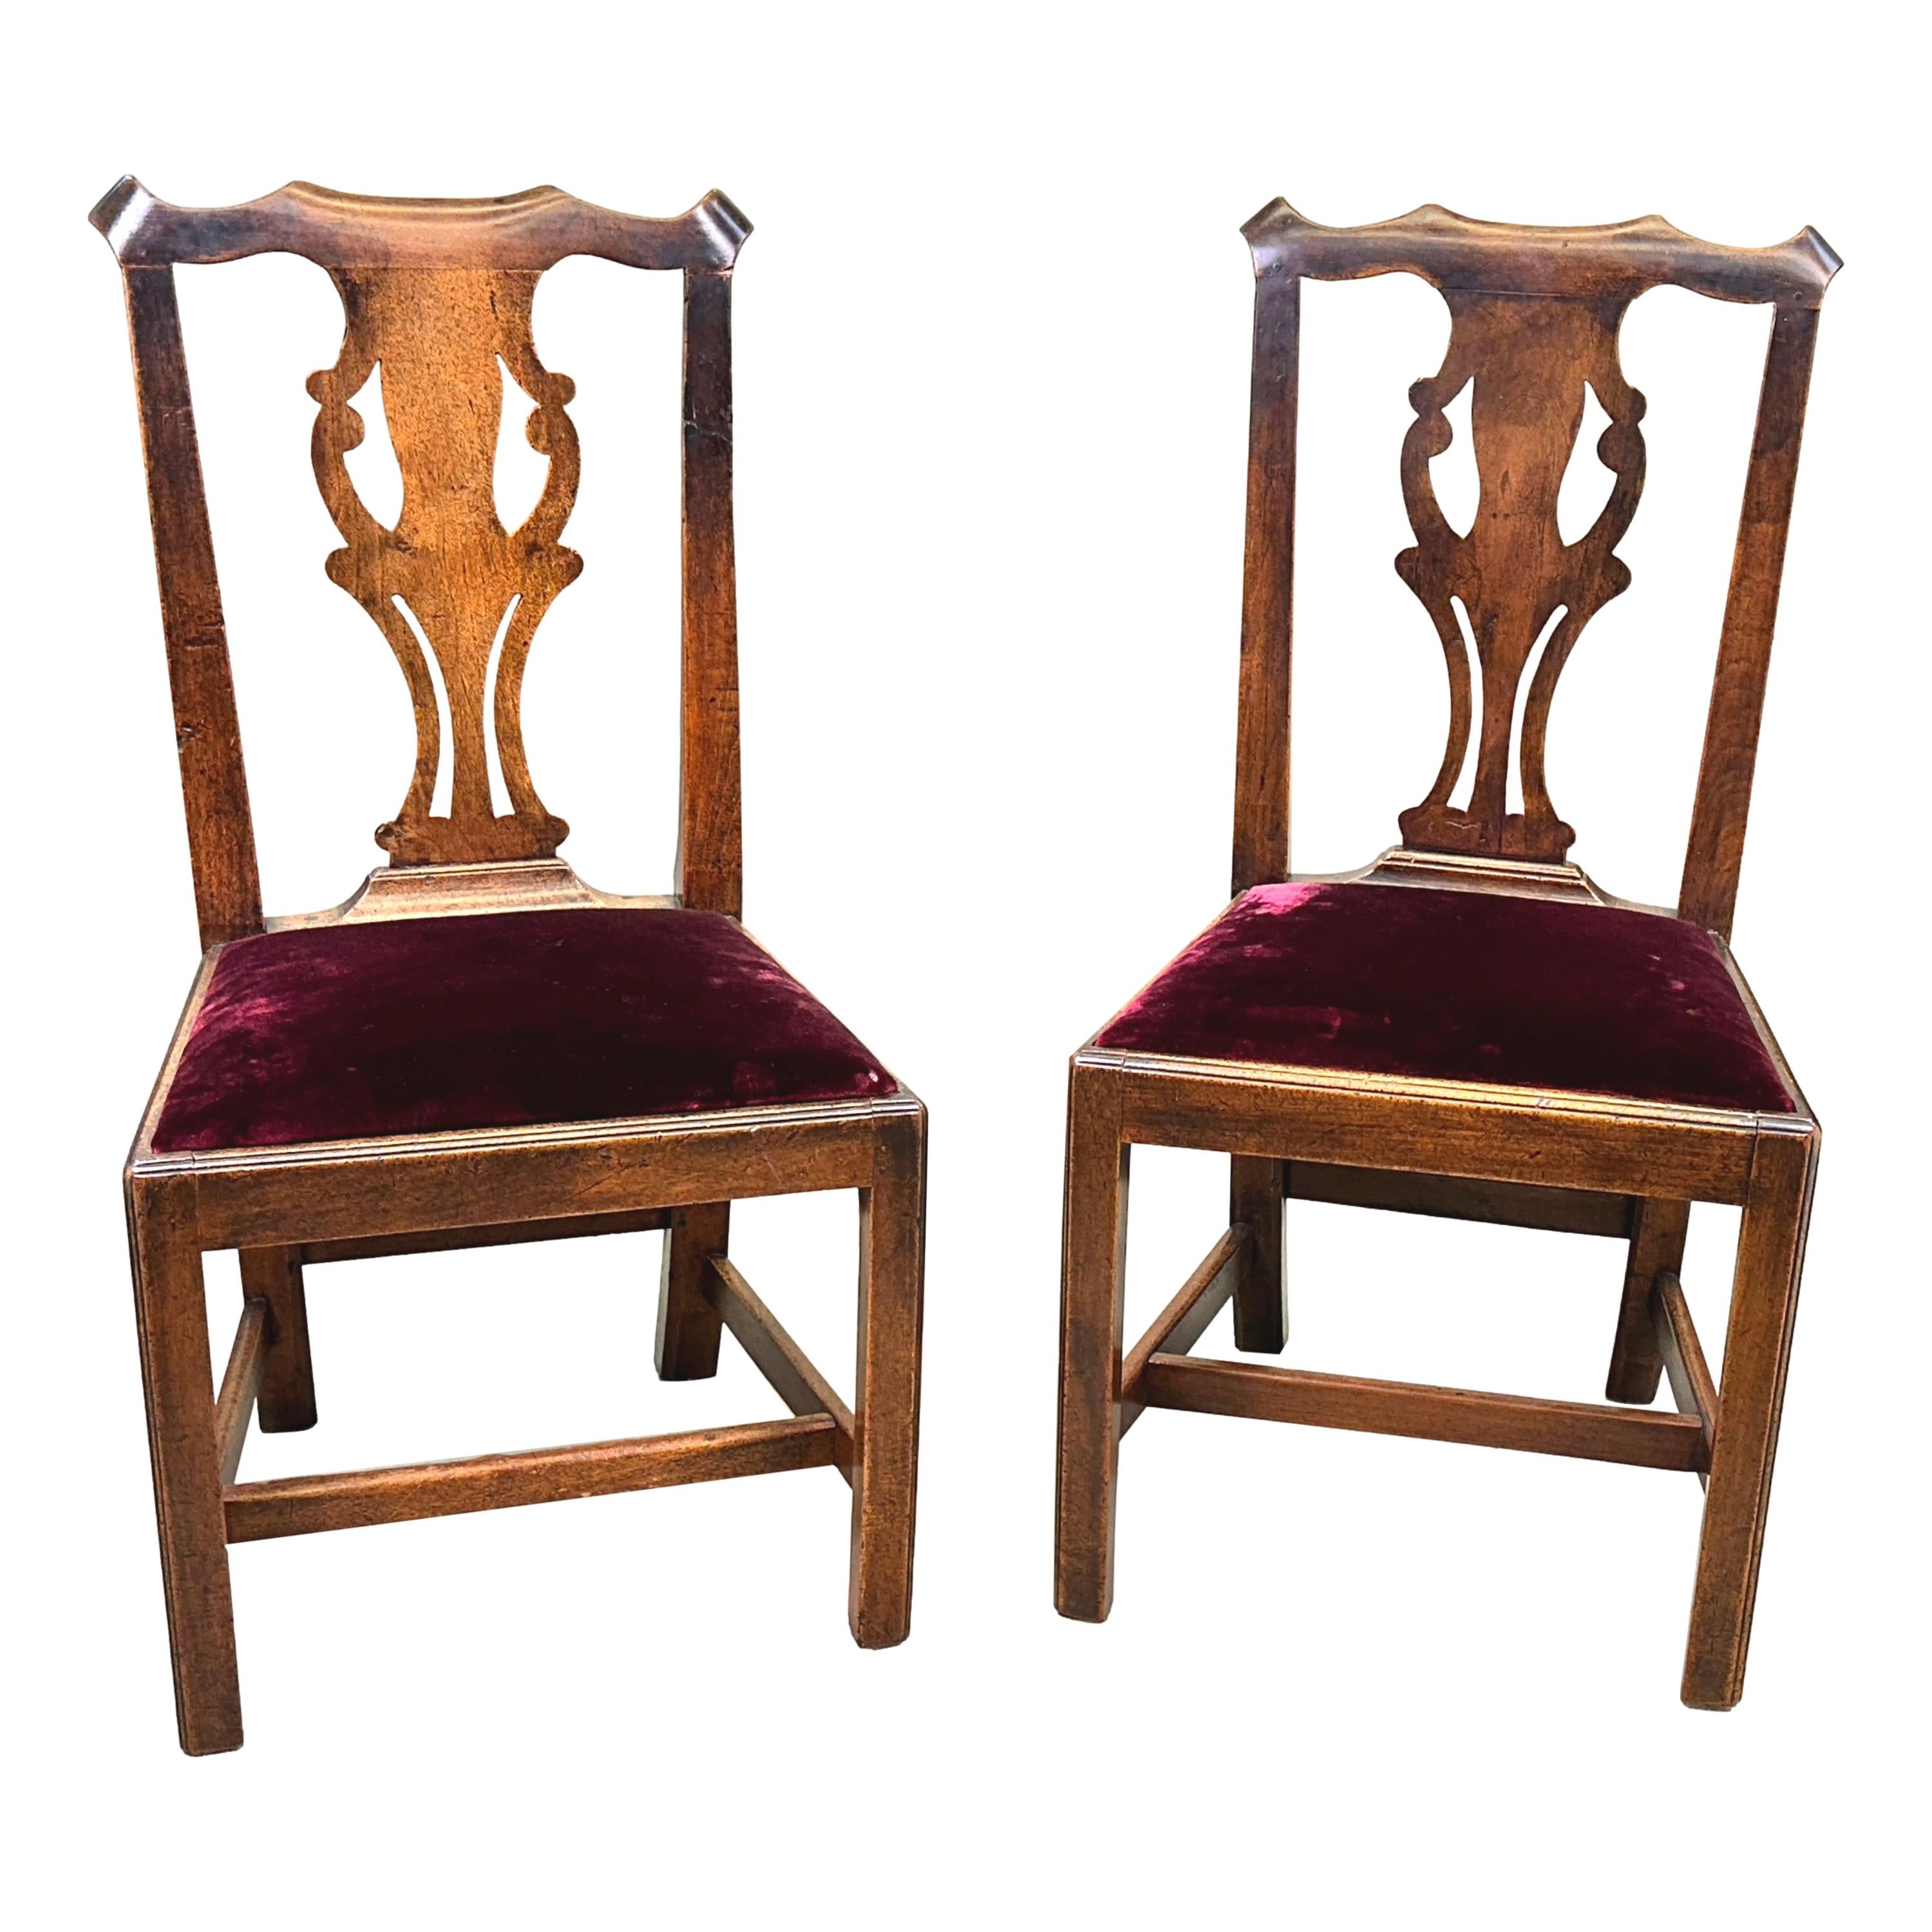 An Extremely Charming Set Of Six Mid 18th Century, Georgian, Chippendale Period, Solid Walnut Country House Type Dining Chairs, Having Very Attractive Pierced Splat Backs With Scrolling Top Rails Over Upholstered Drop In Seats Raised On Square